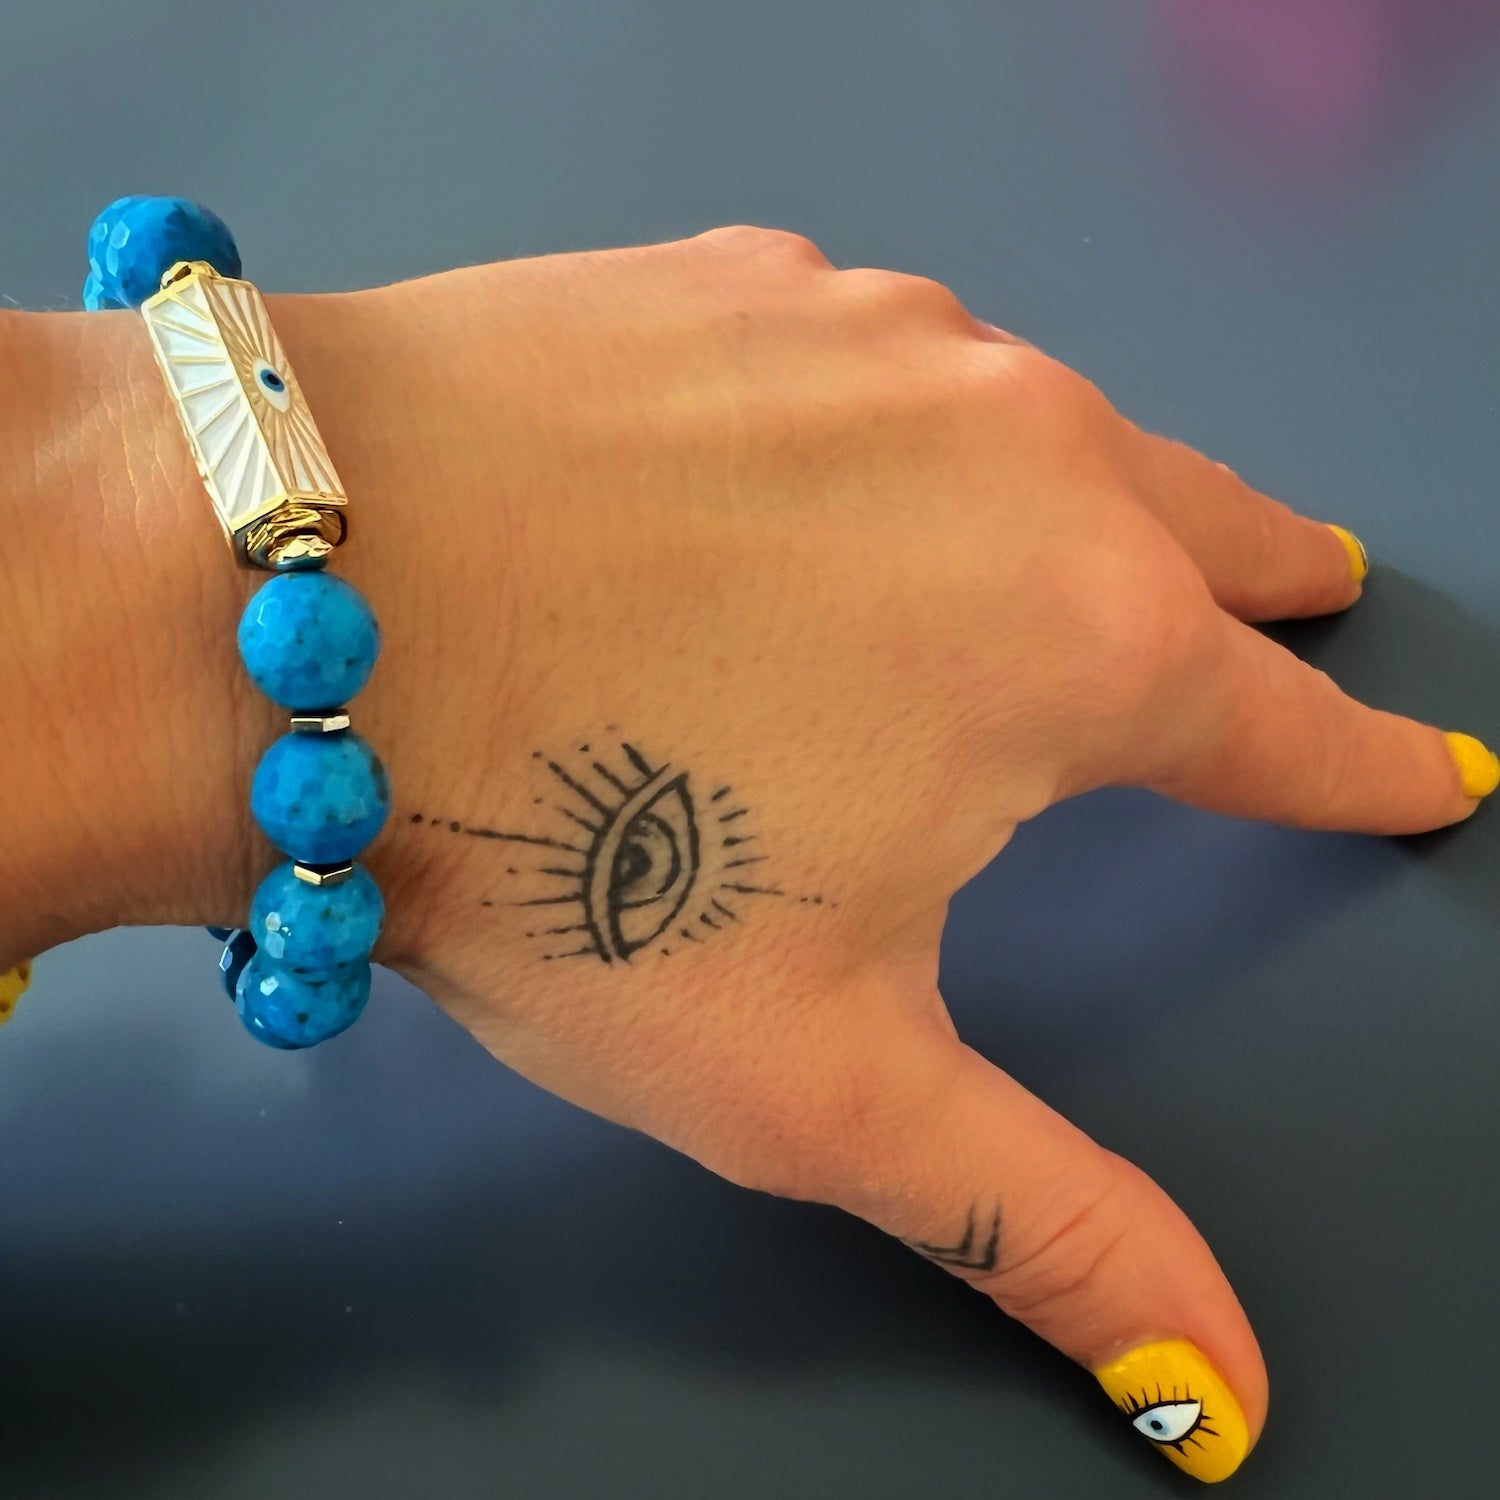 The hand model showcases the elegance and symbolism of the Turquoise Luck and Protection Bracelet, radiating positive energy.